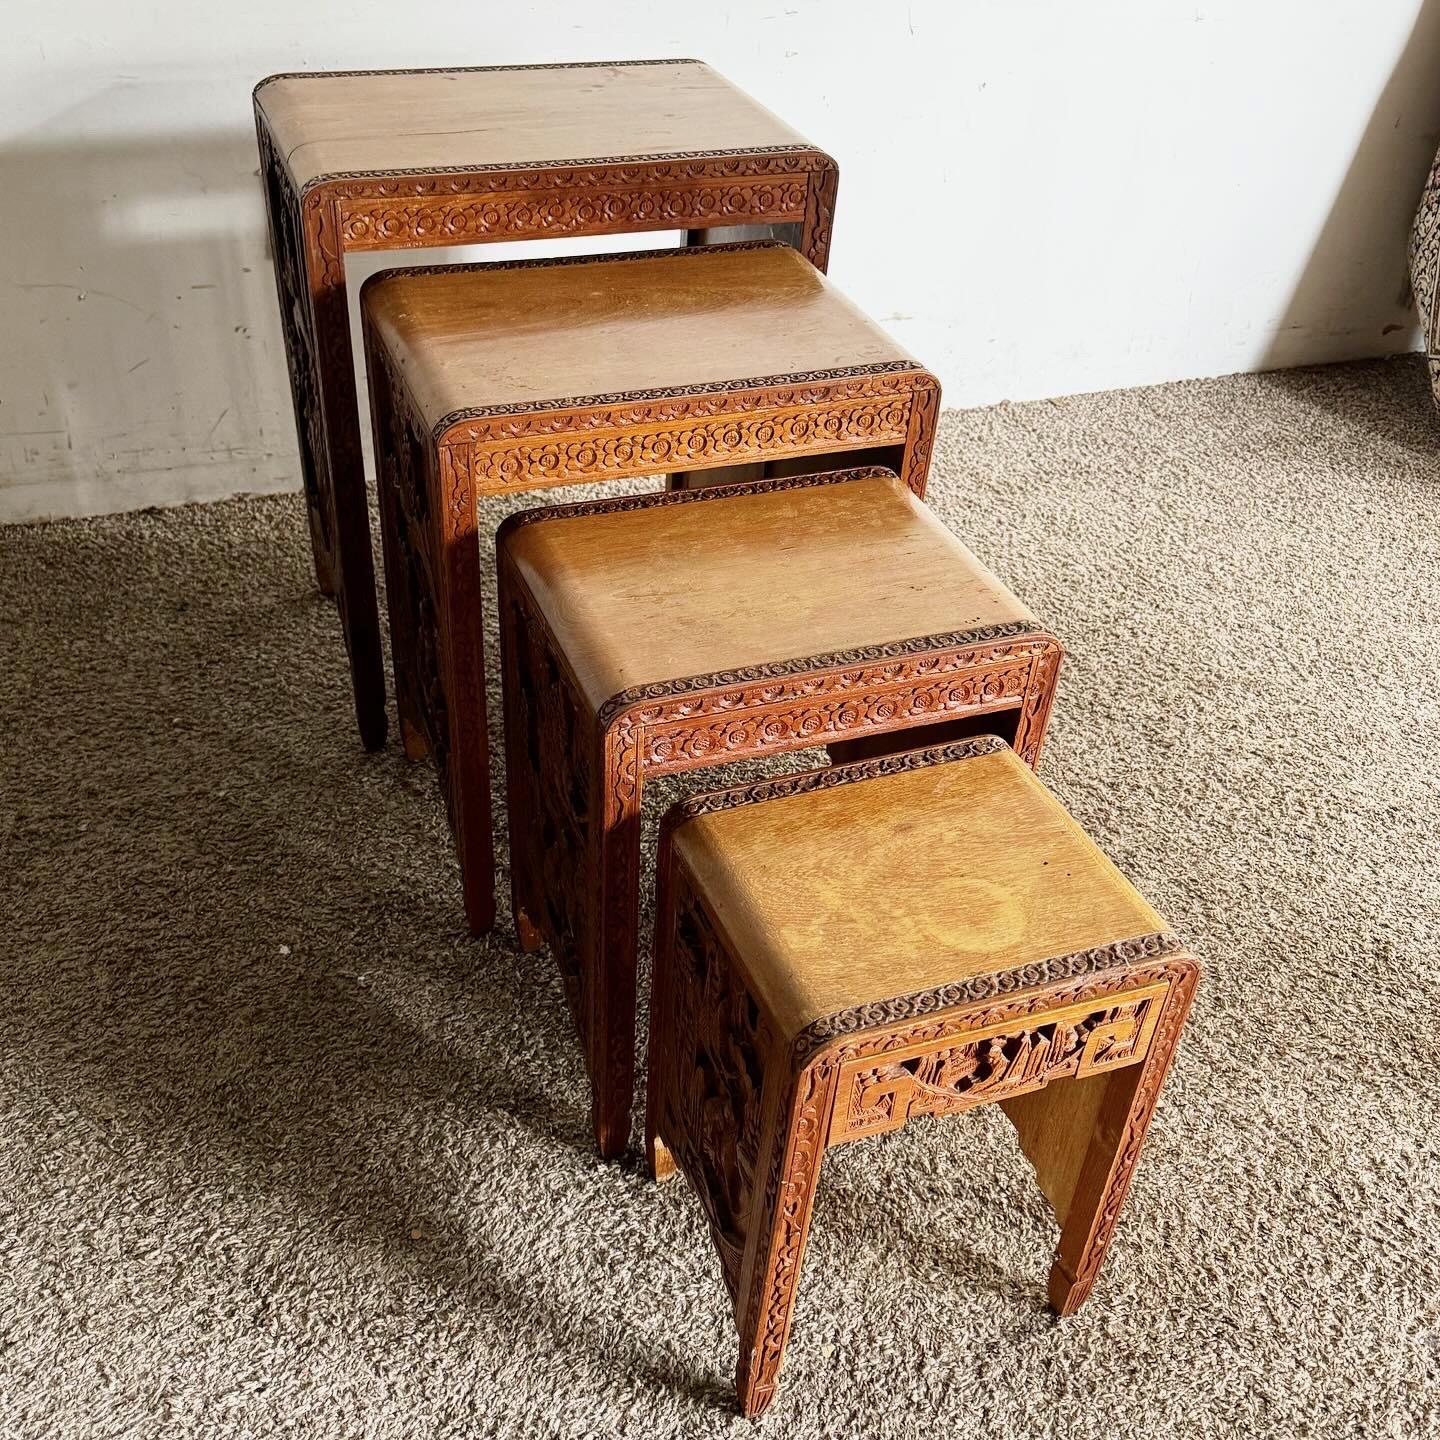 Hong Kong Antique Chinese Hand Carved Nesting Tables - Set of 4